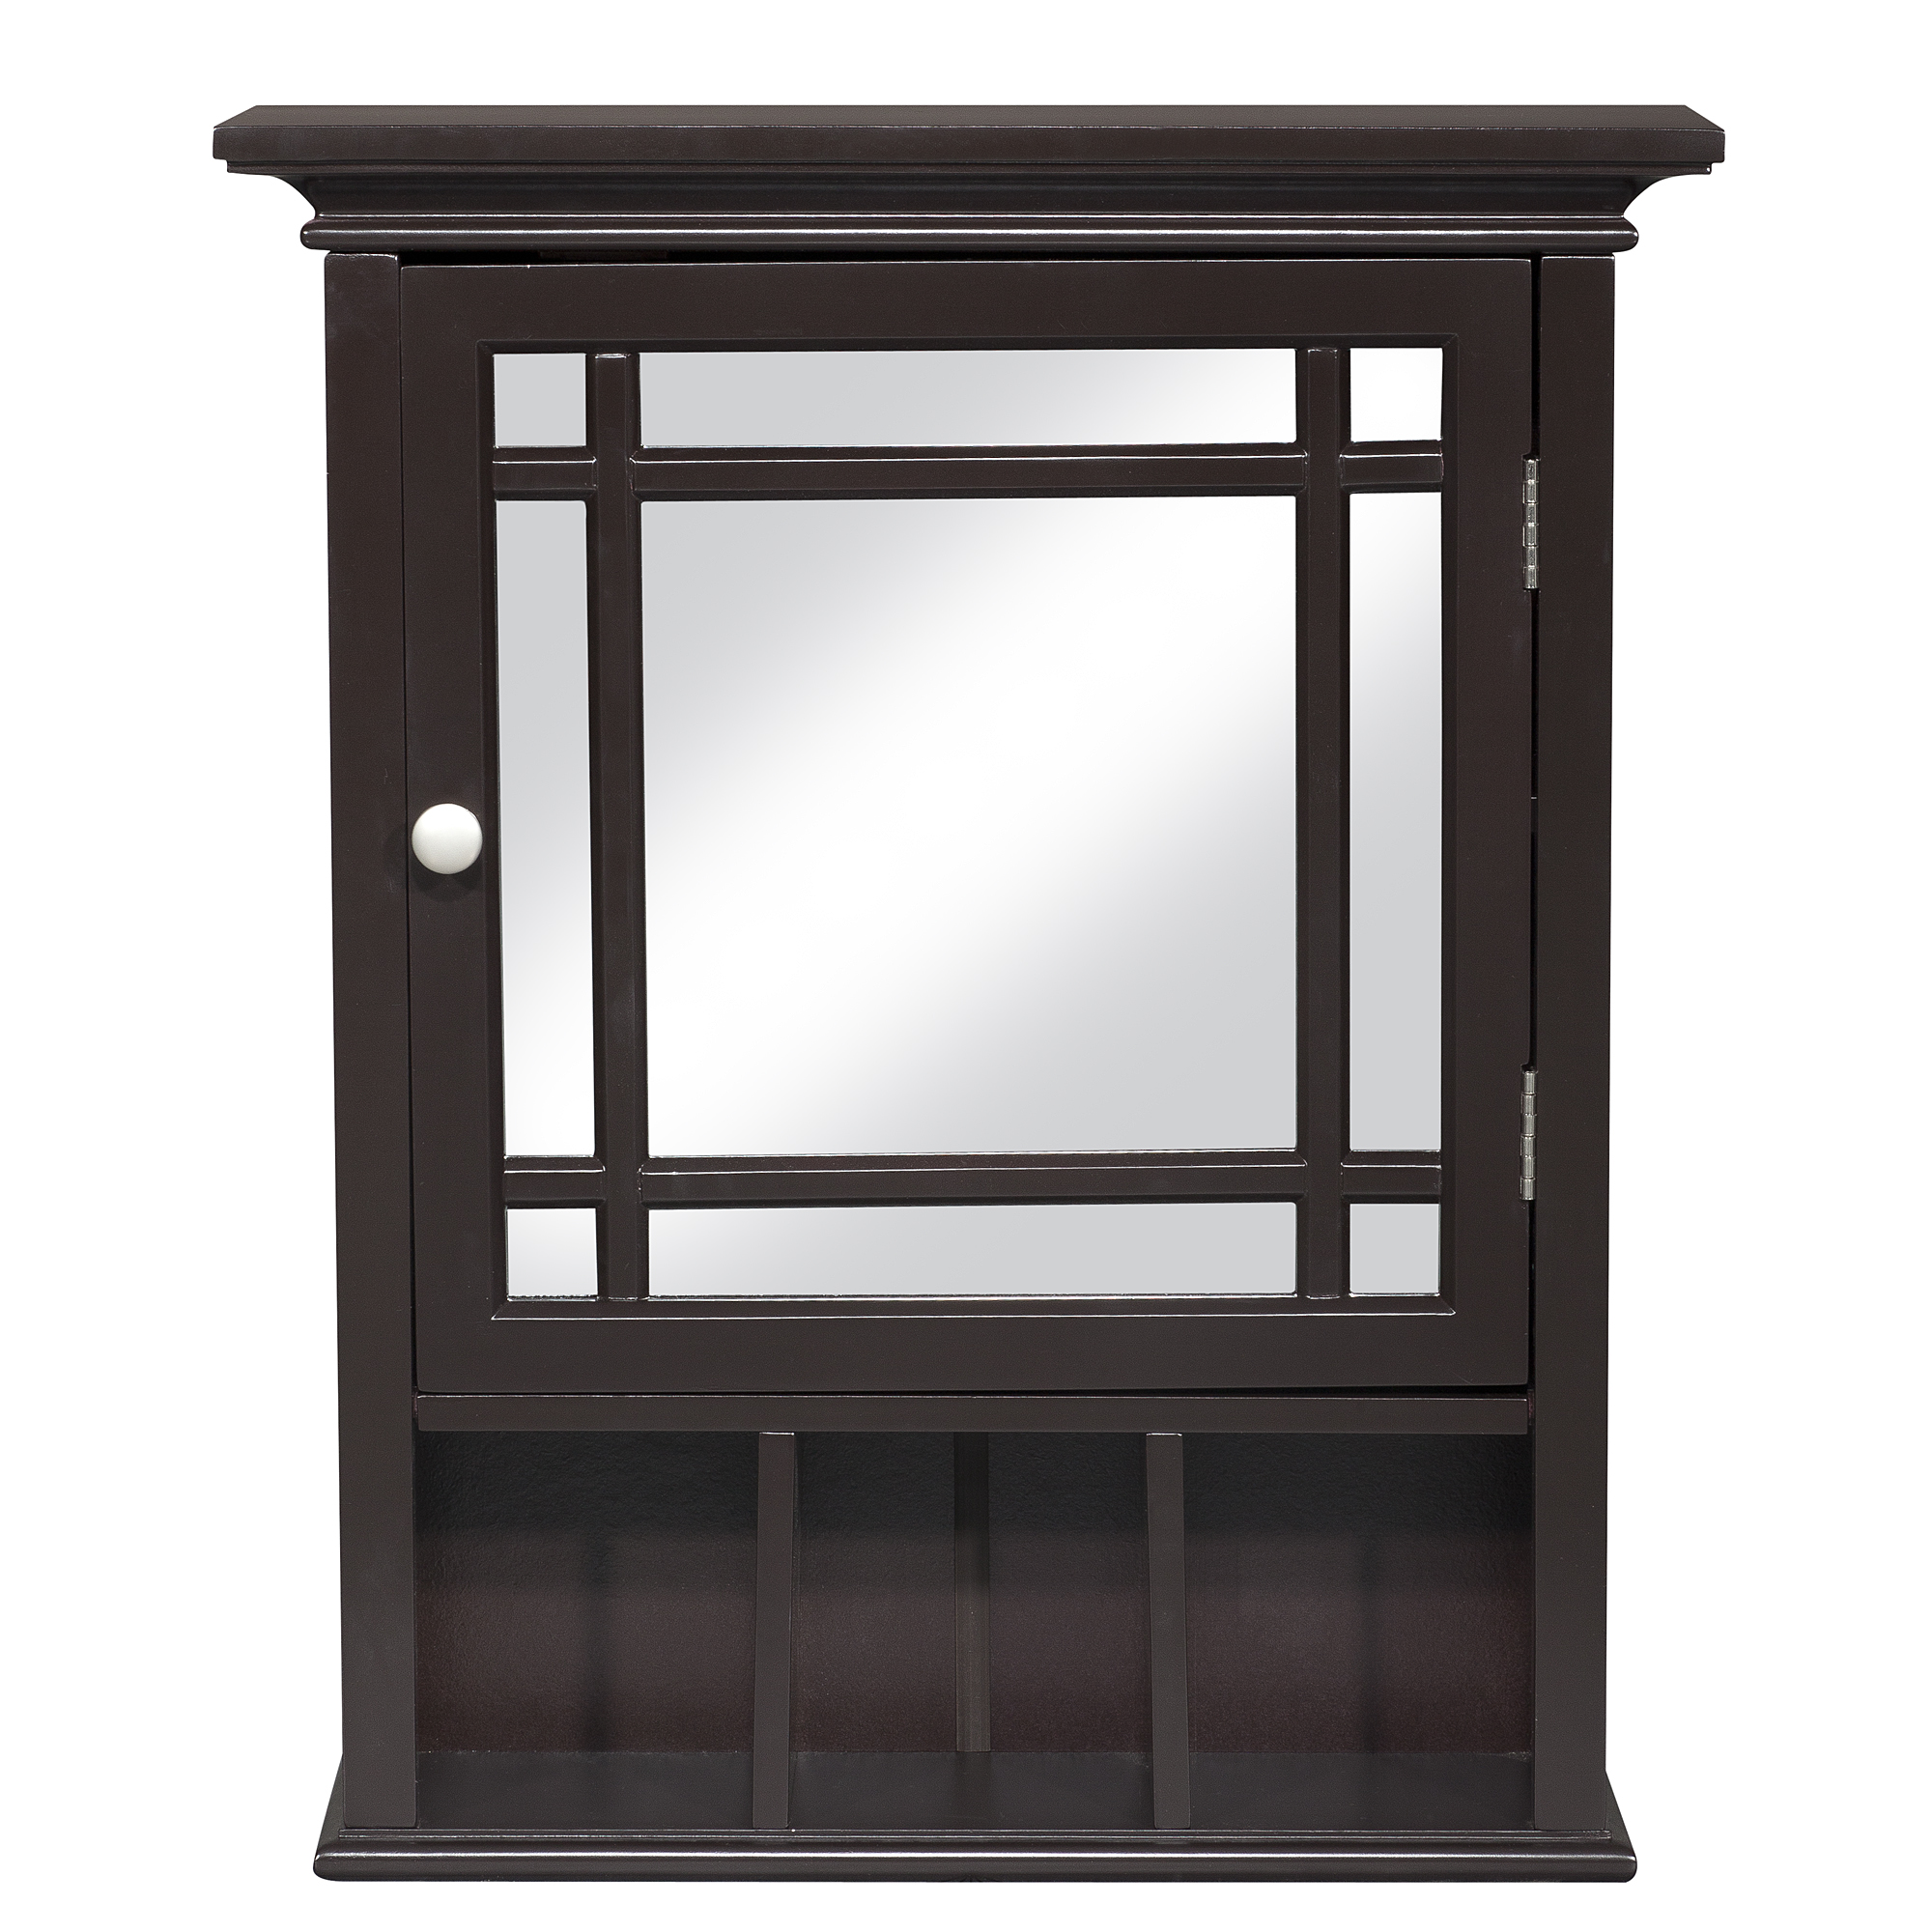 Teamson Home Neal Removable Wooden Medicine Cabinet with Mirrored Door, Espresso - image 1 of 7